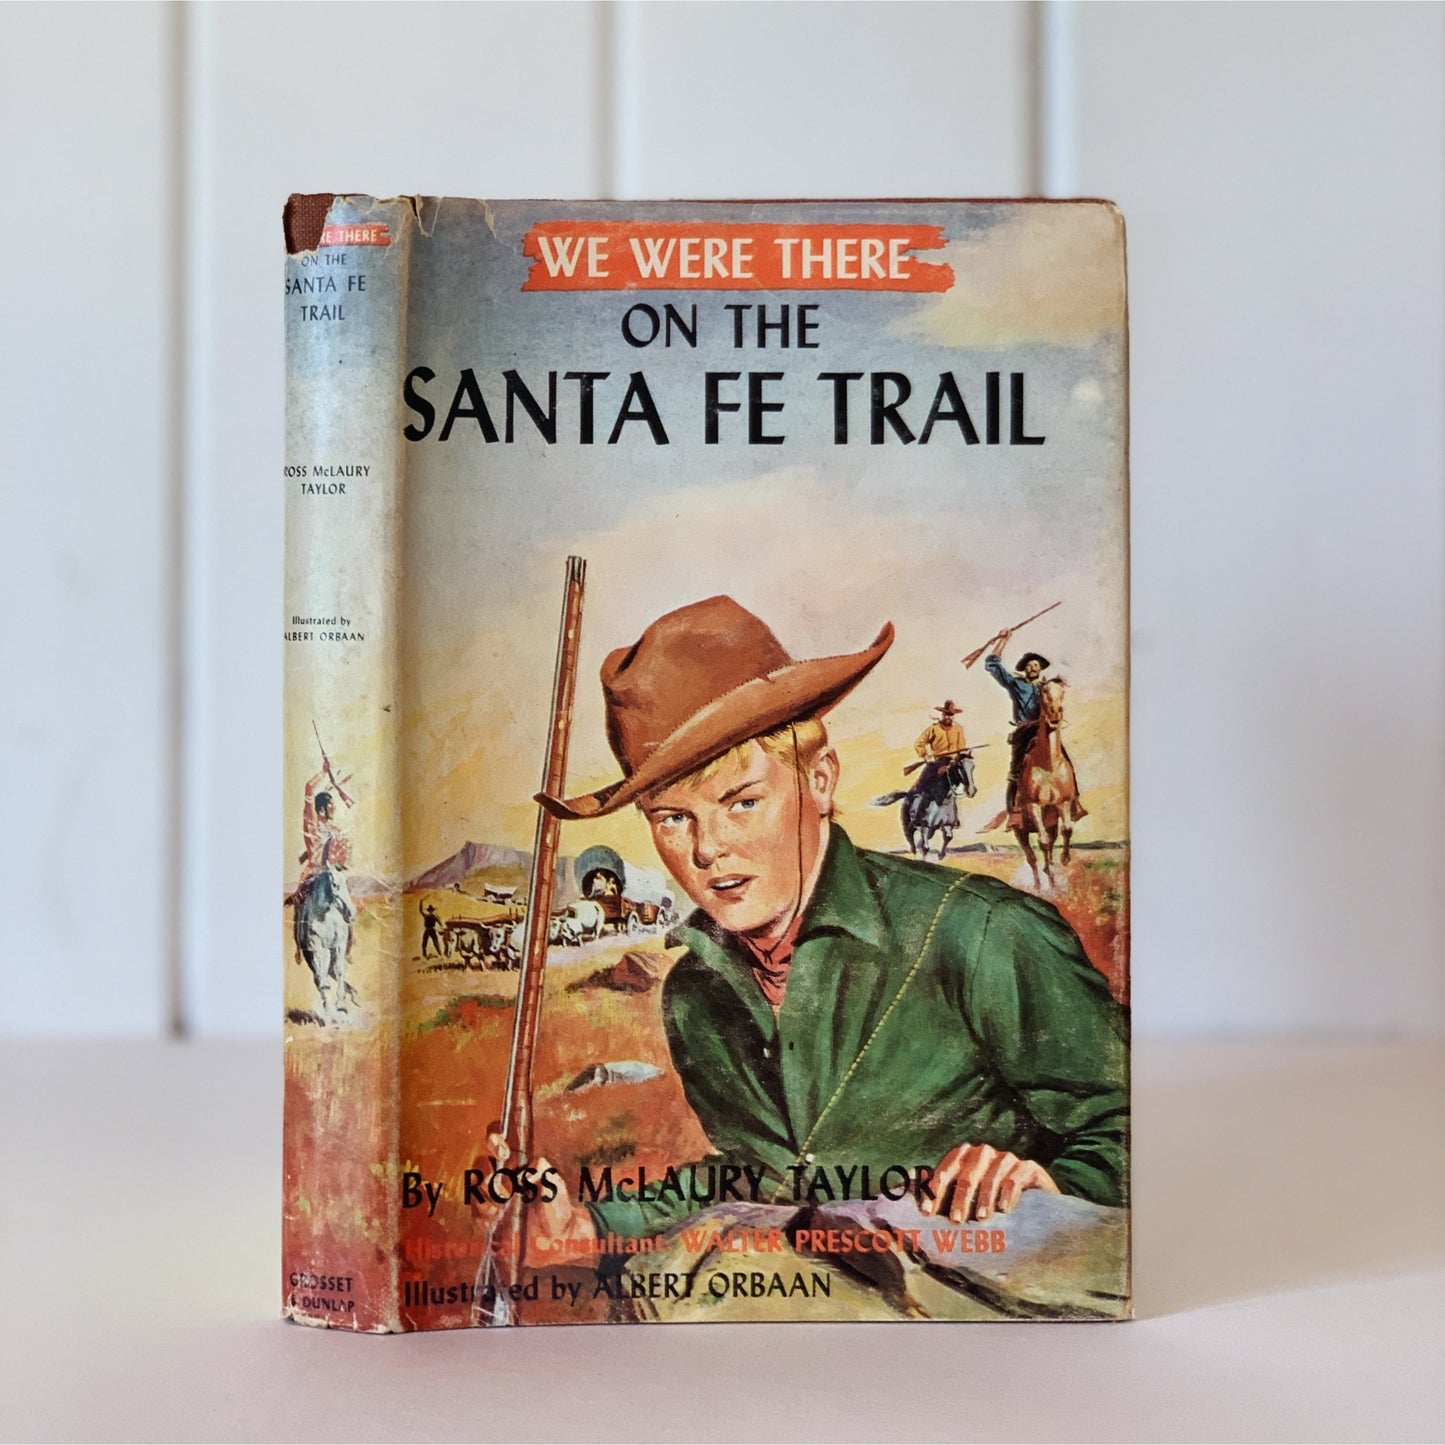 We Were There on the Santa Fe Trail, Ross McLaury Taylor 1960, Hardcover